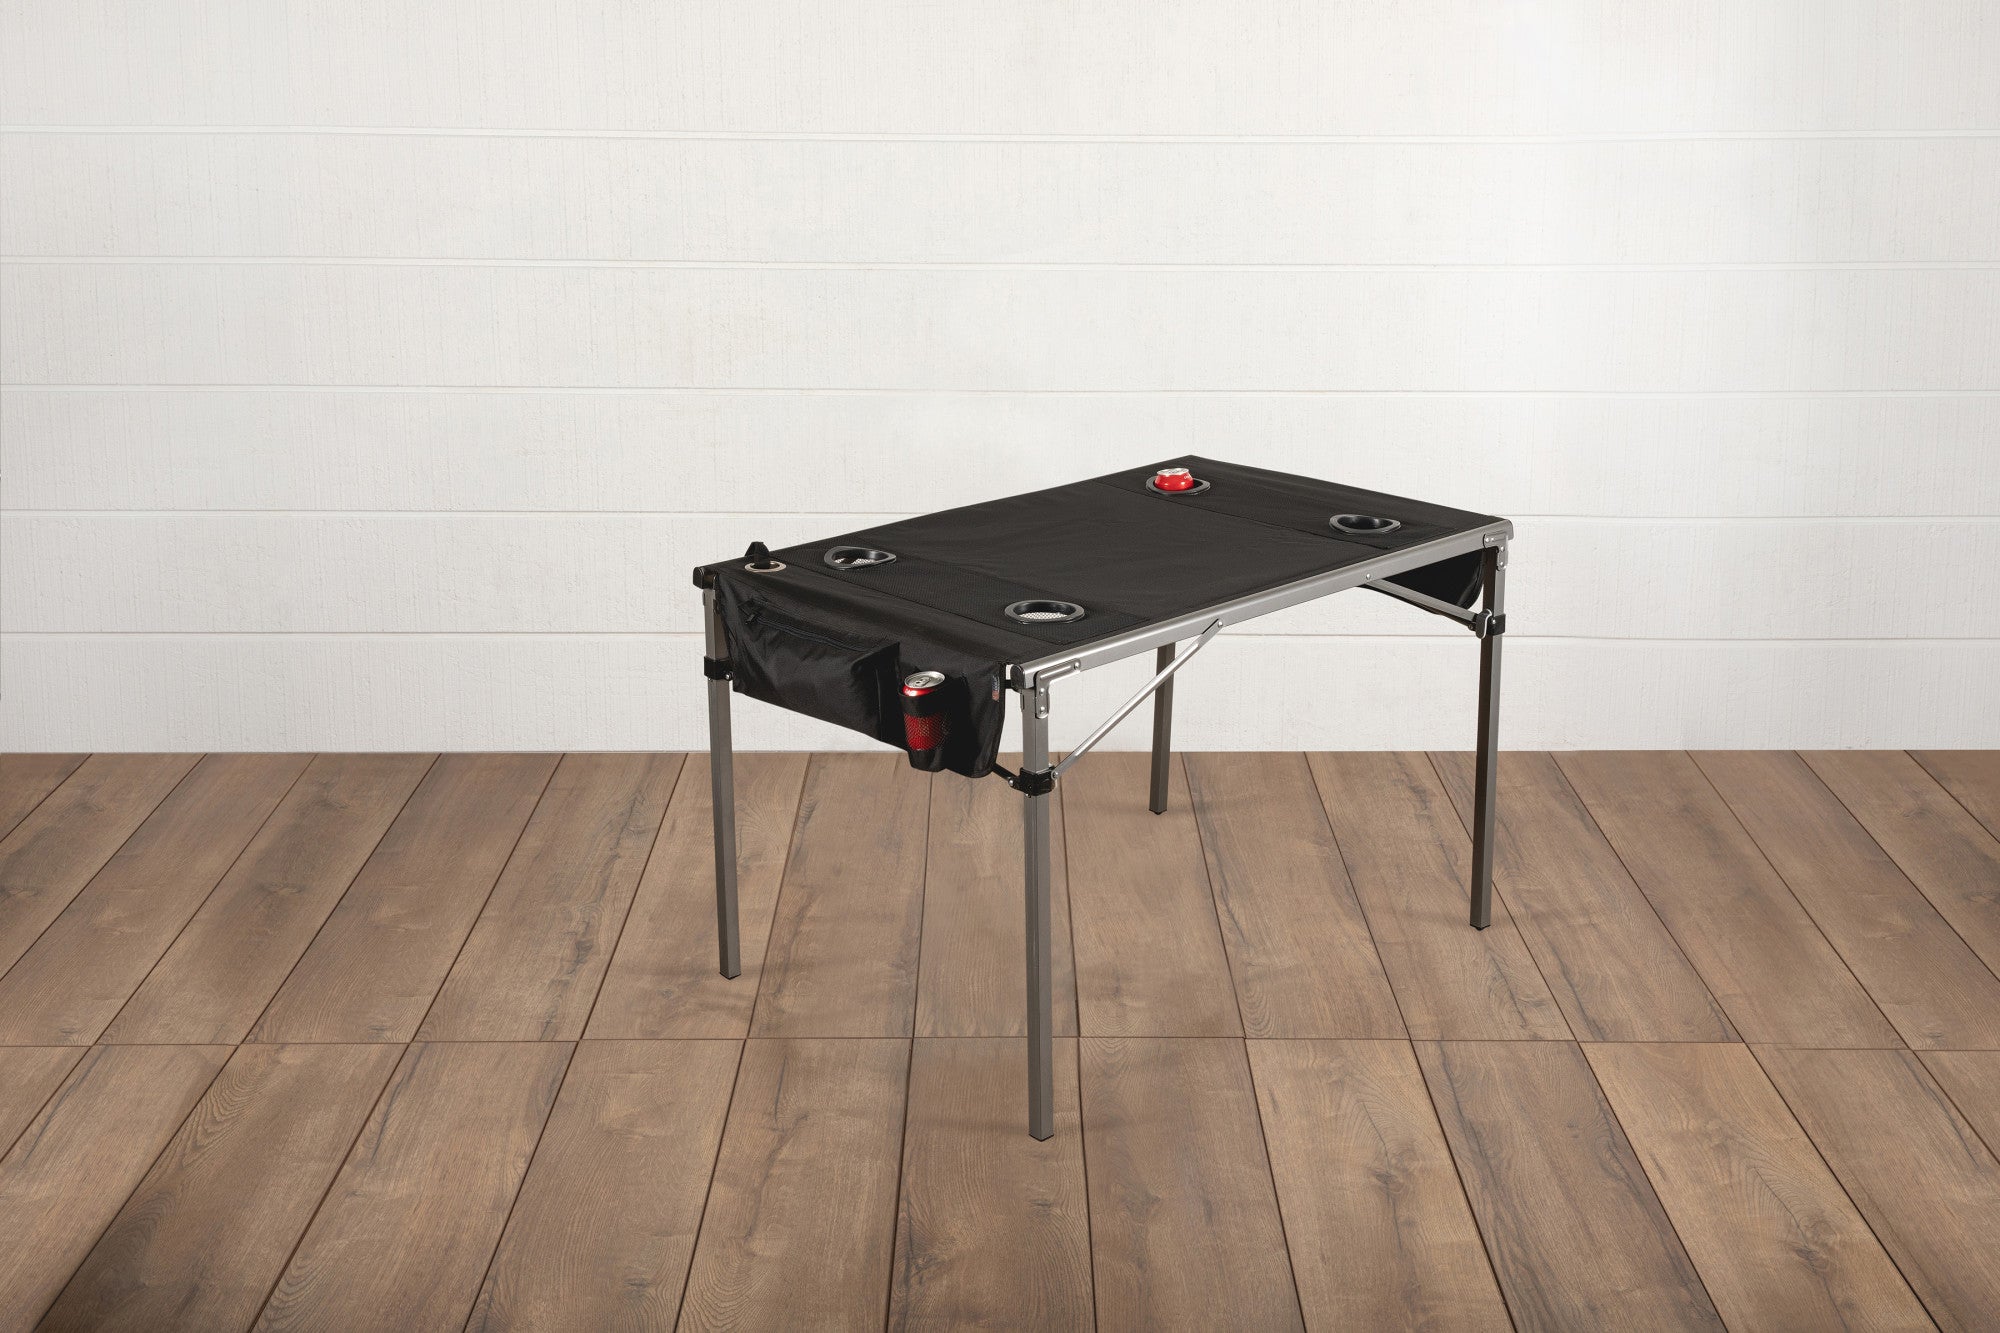 Stanford Cardinal - Travel Table Portable Folding Table